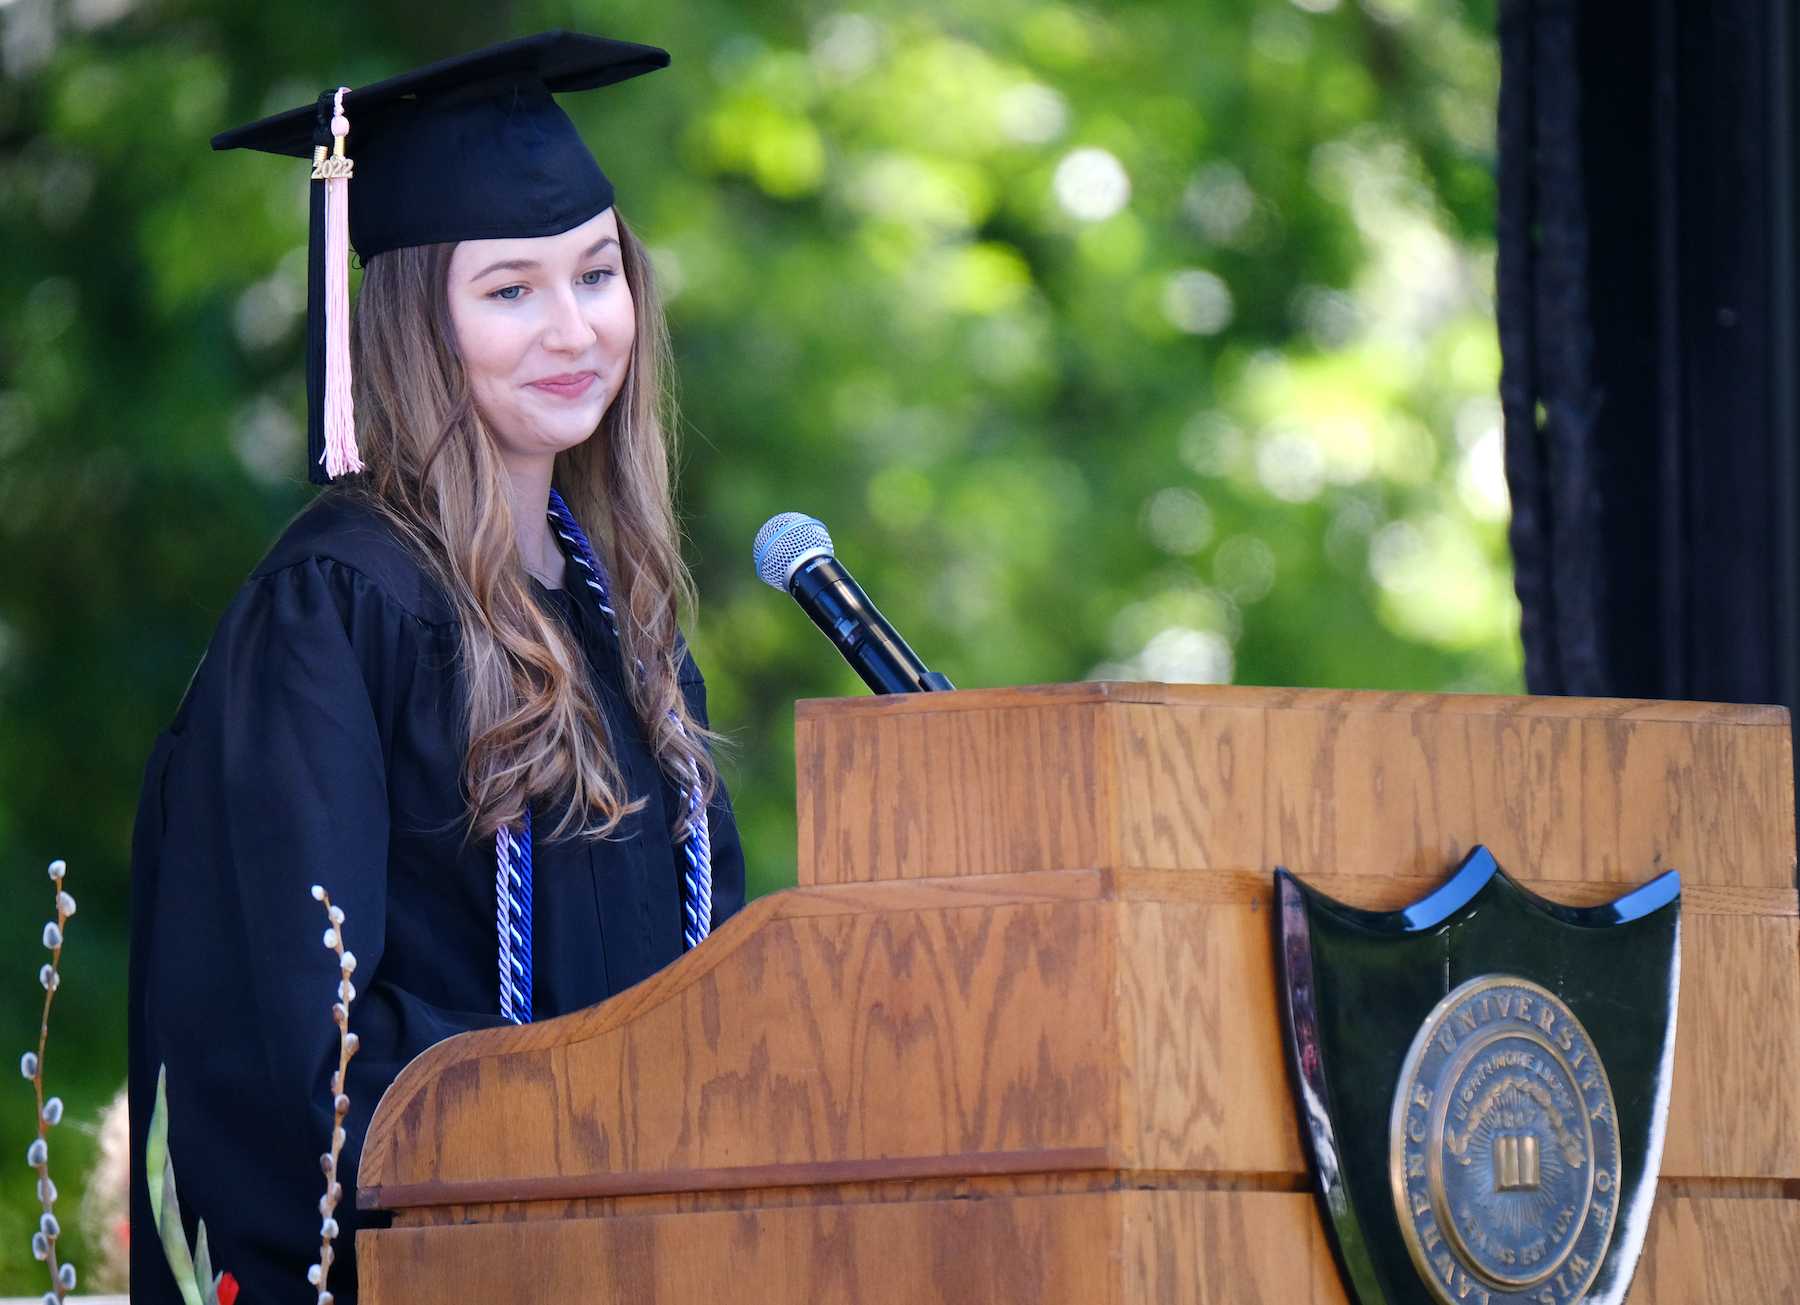 Jessica Toncler delivers her speech as the senior class speaker.